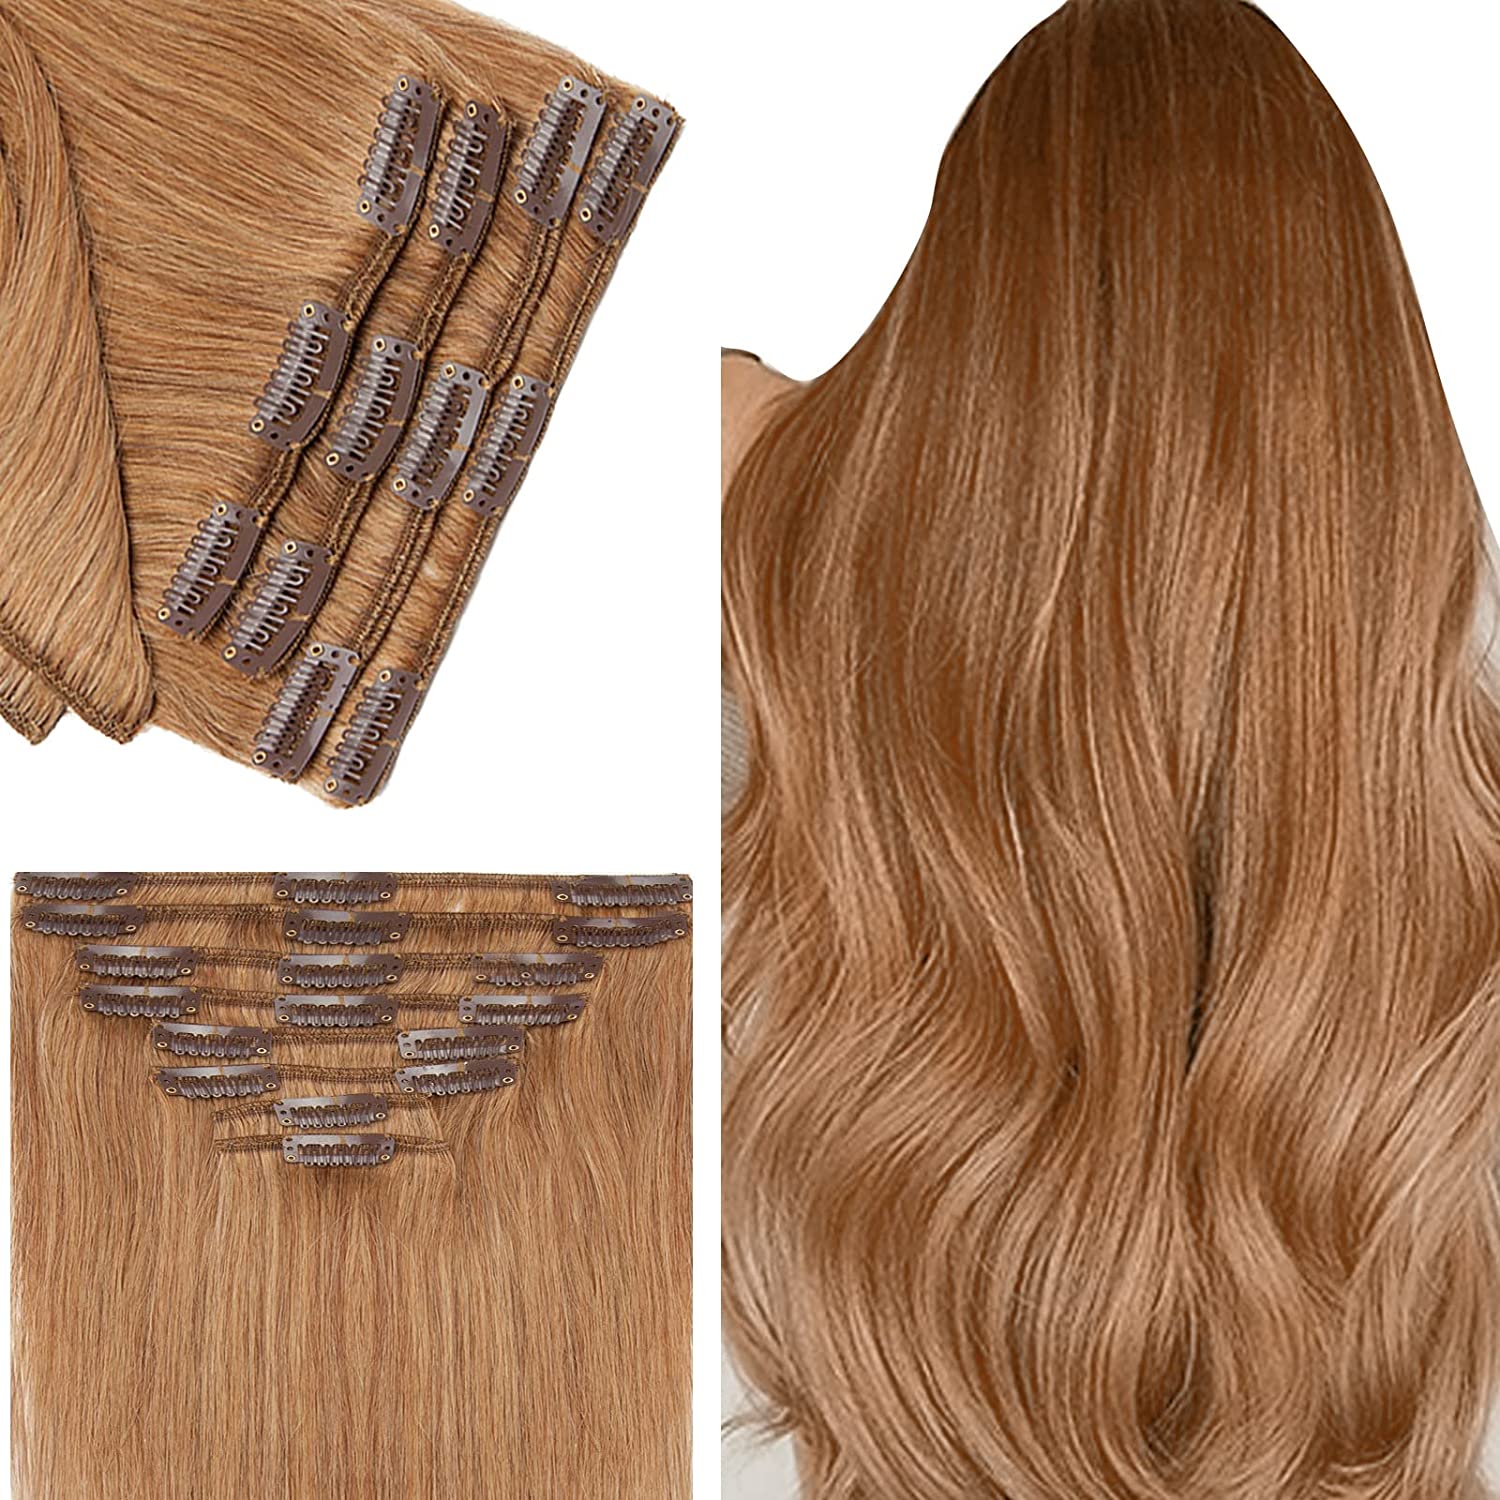 SEGO Clip in Hair Extensions Human Hair 8PCS 18-24inch